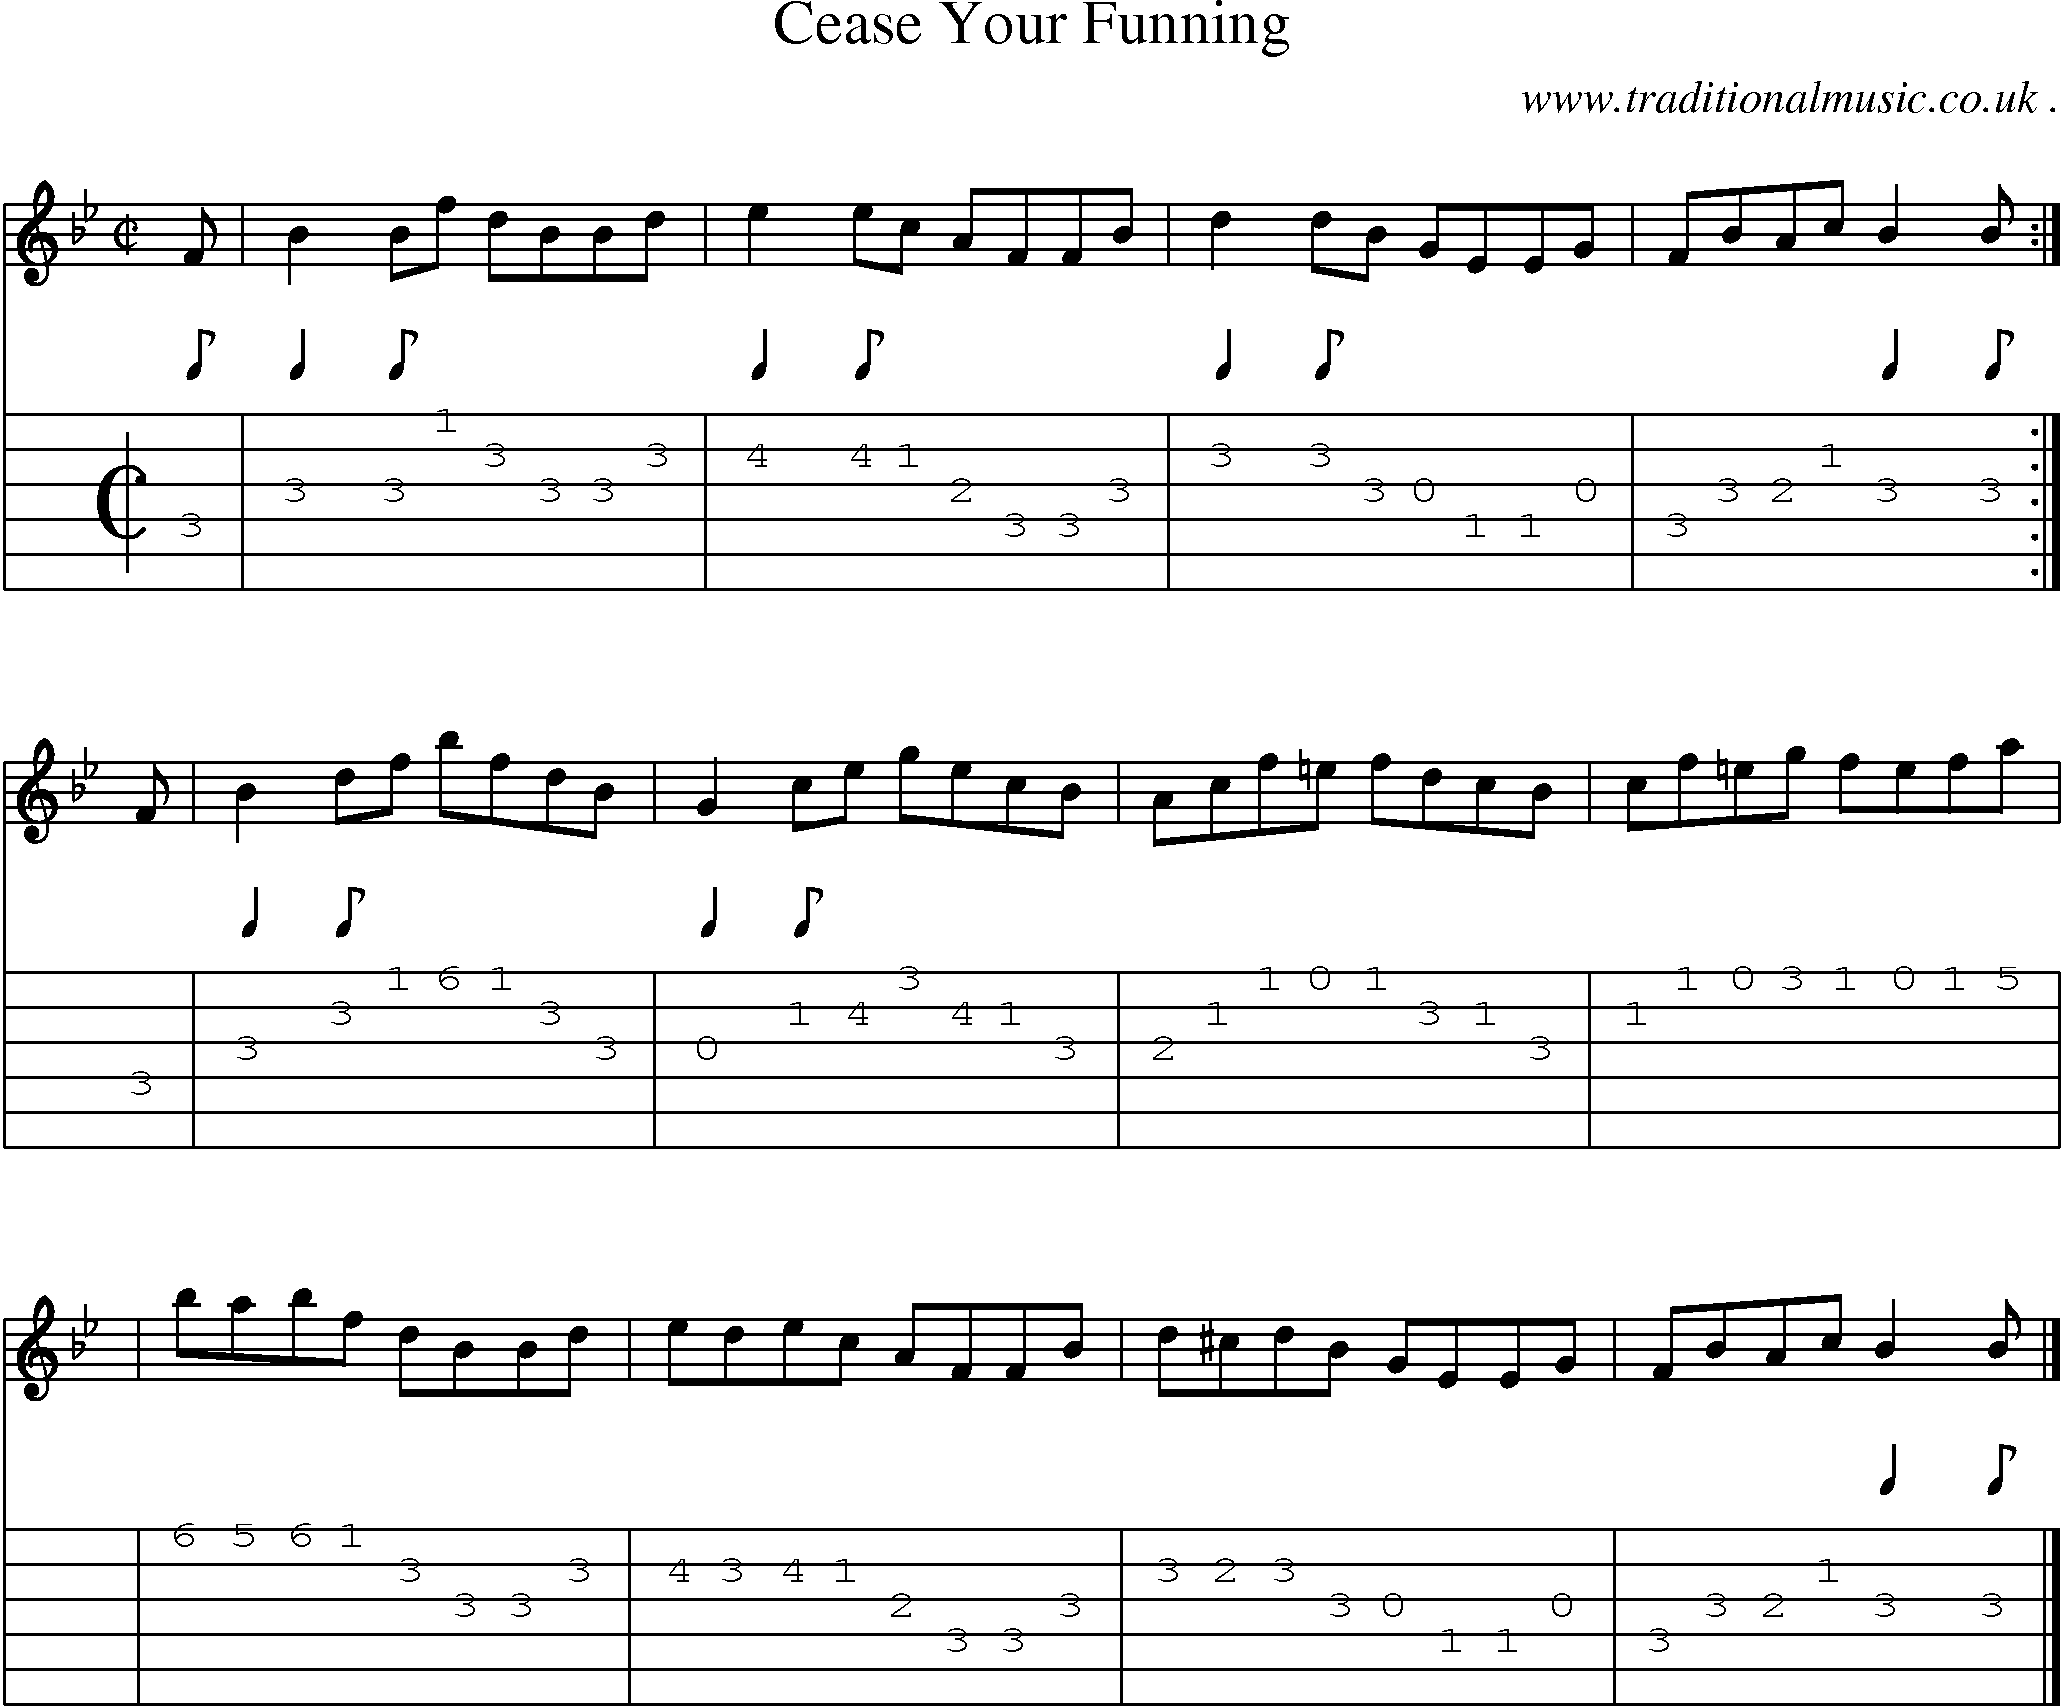 Sheet-music  score, Chords and Guitar Tabs for Cease Your Funning